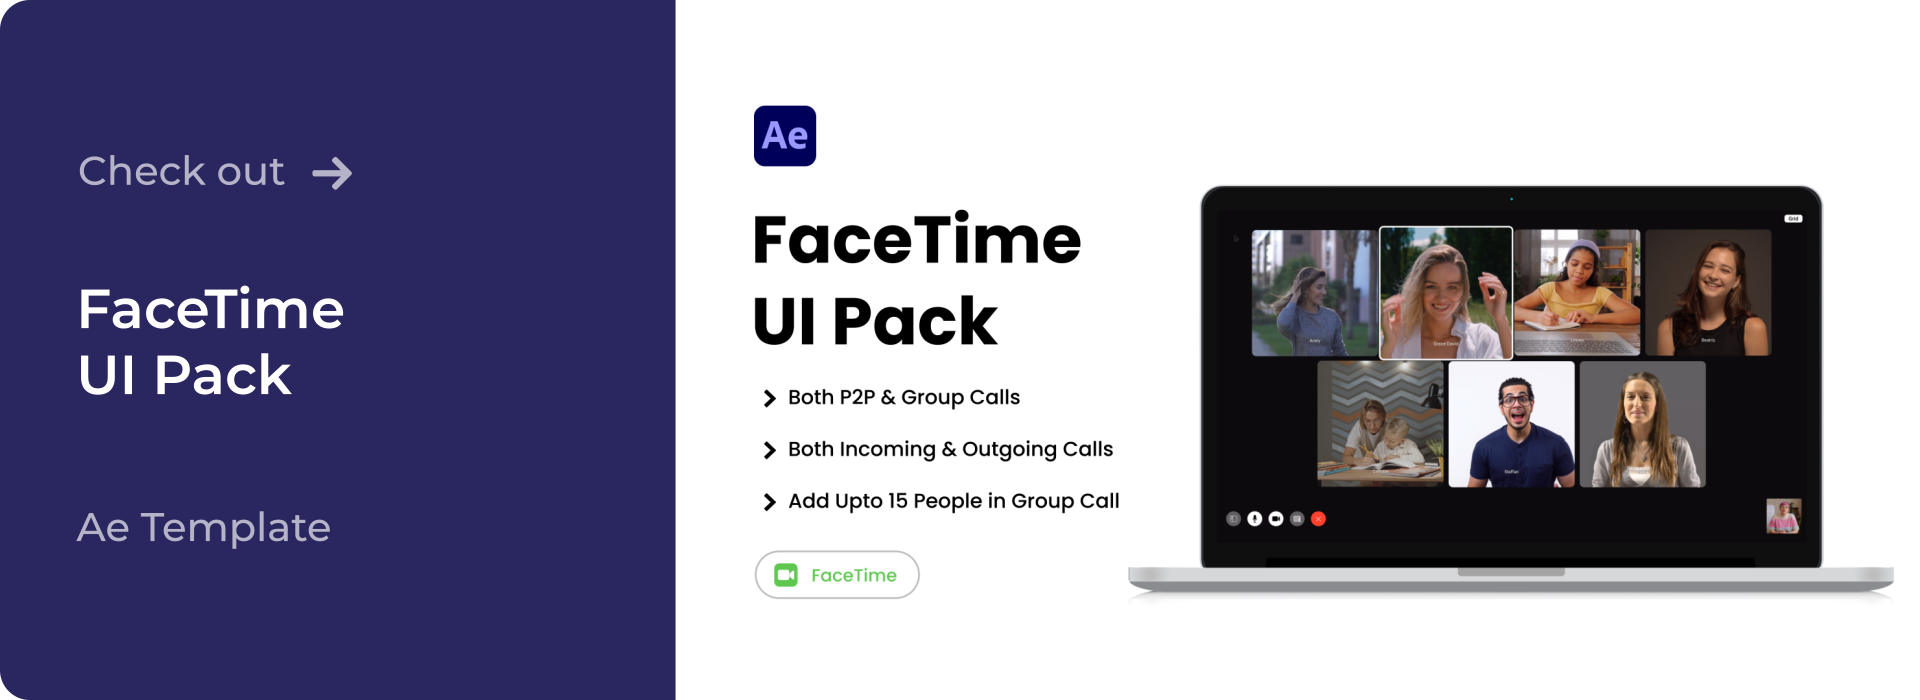 Check out FaceTime AE Template